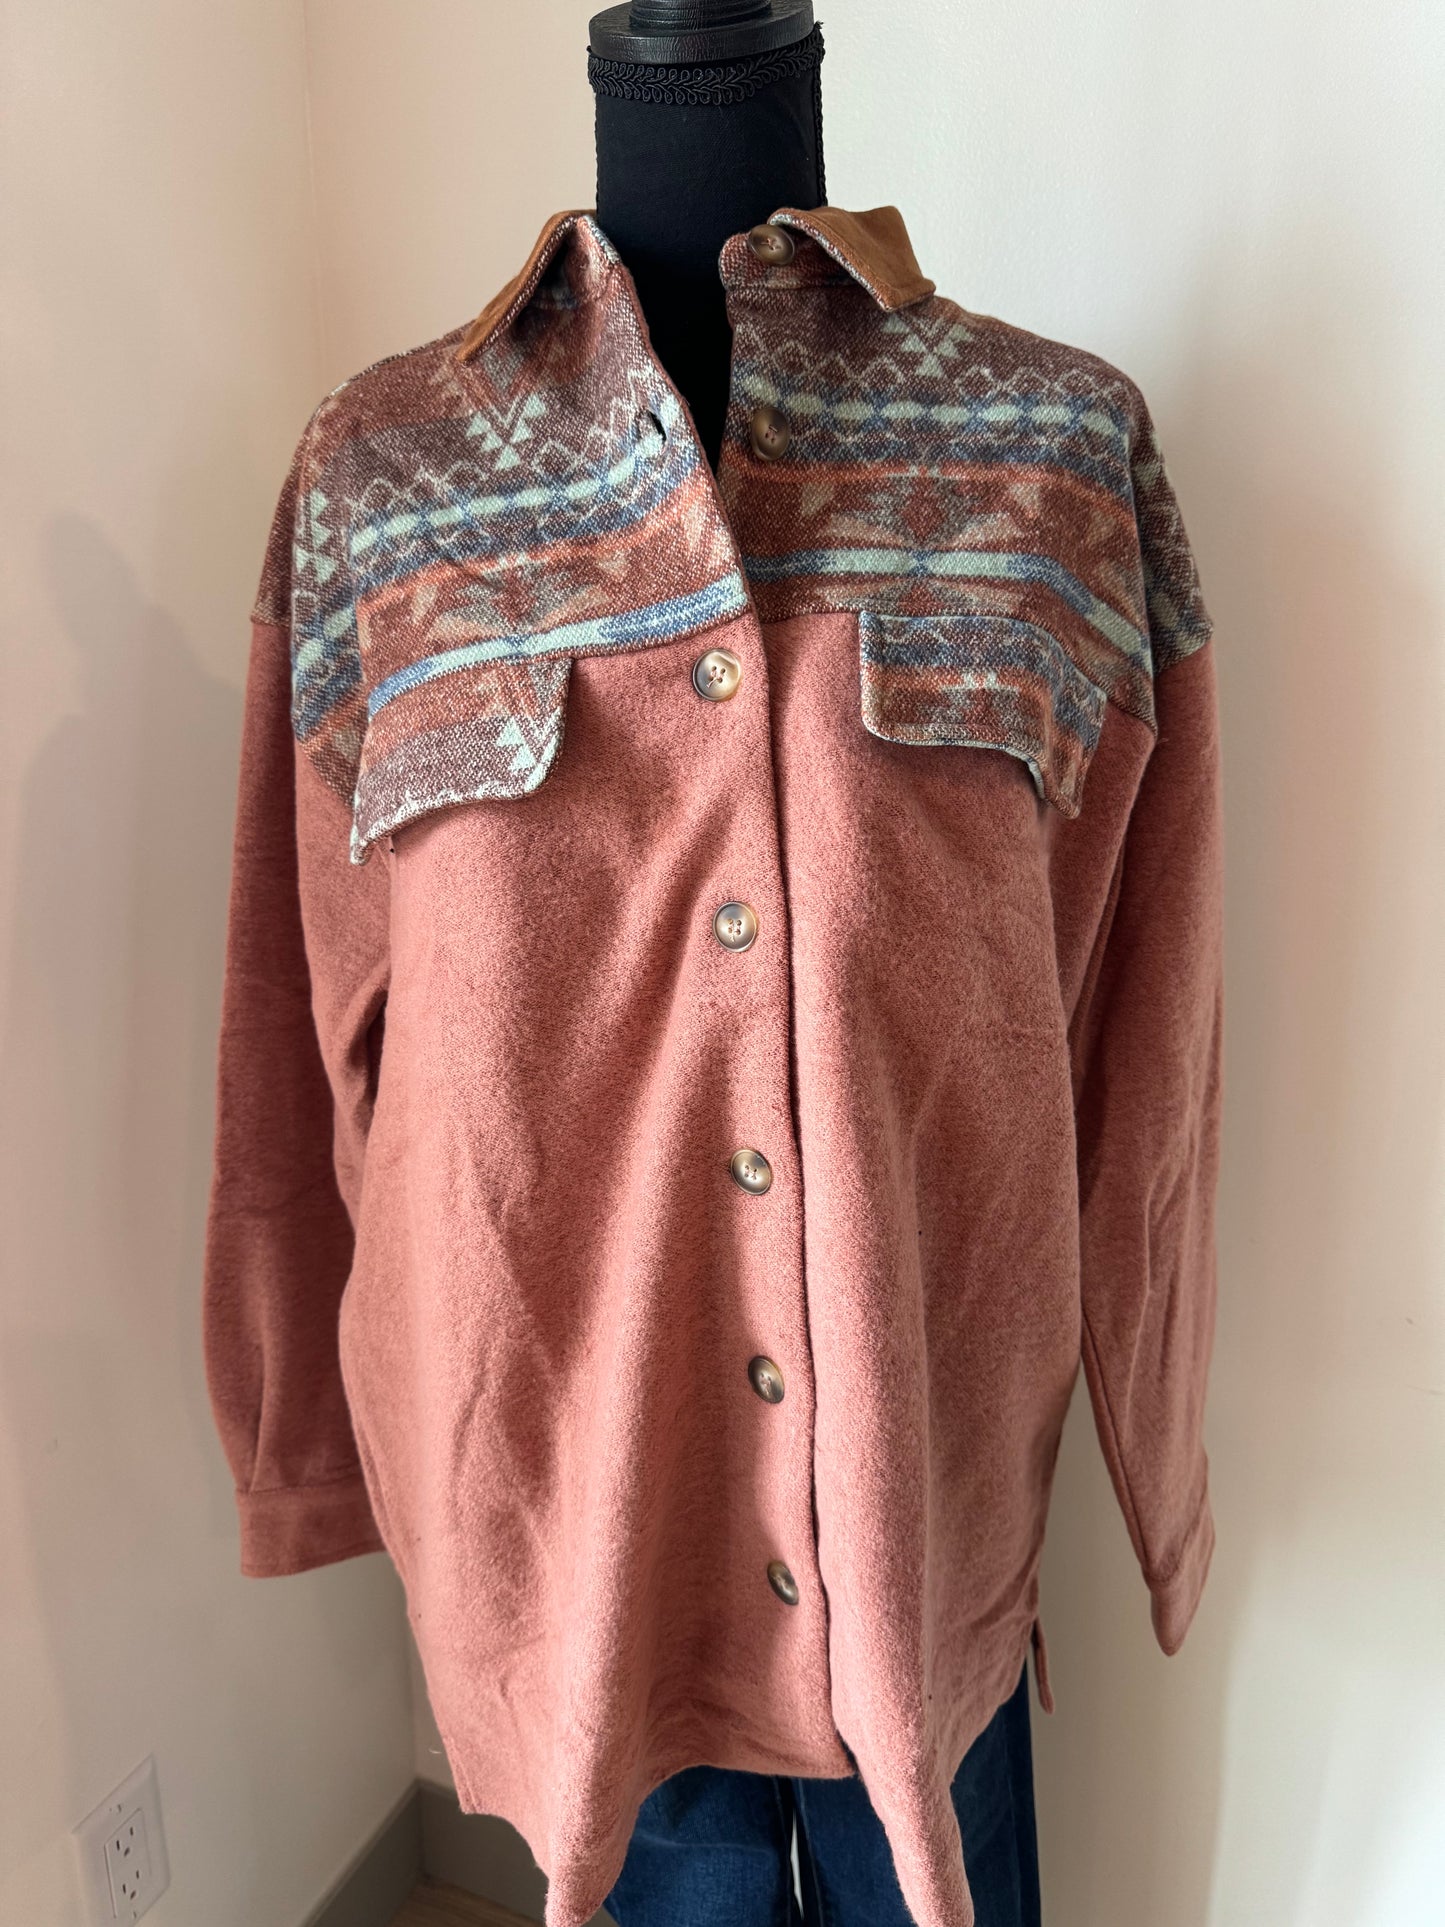 mannequin view of Brush Aztec Contrast Suede Collared Shirt Jacket with Pocket Front and Button-Up Closure.